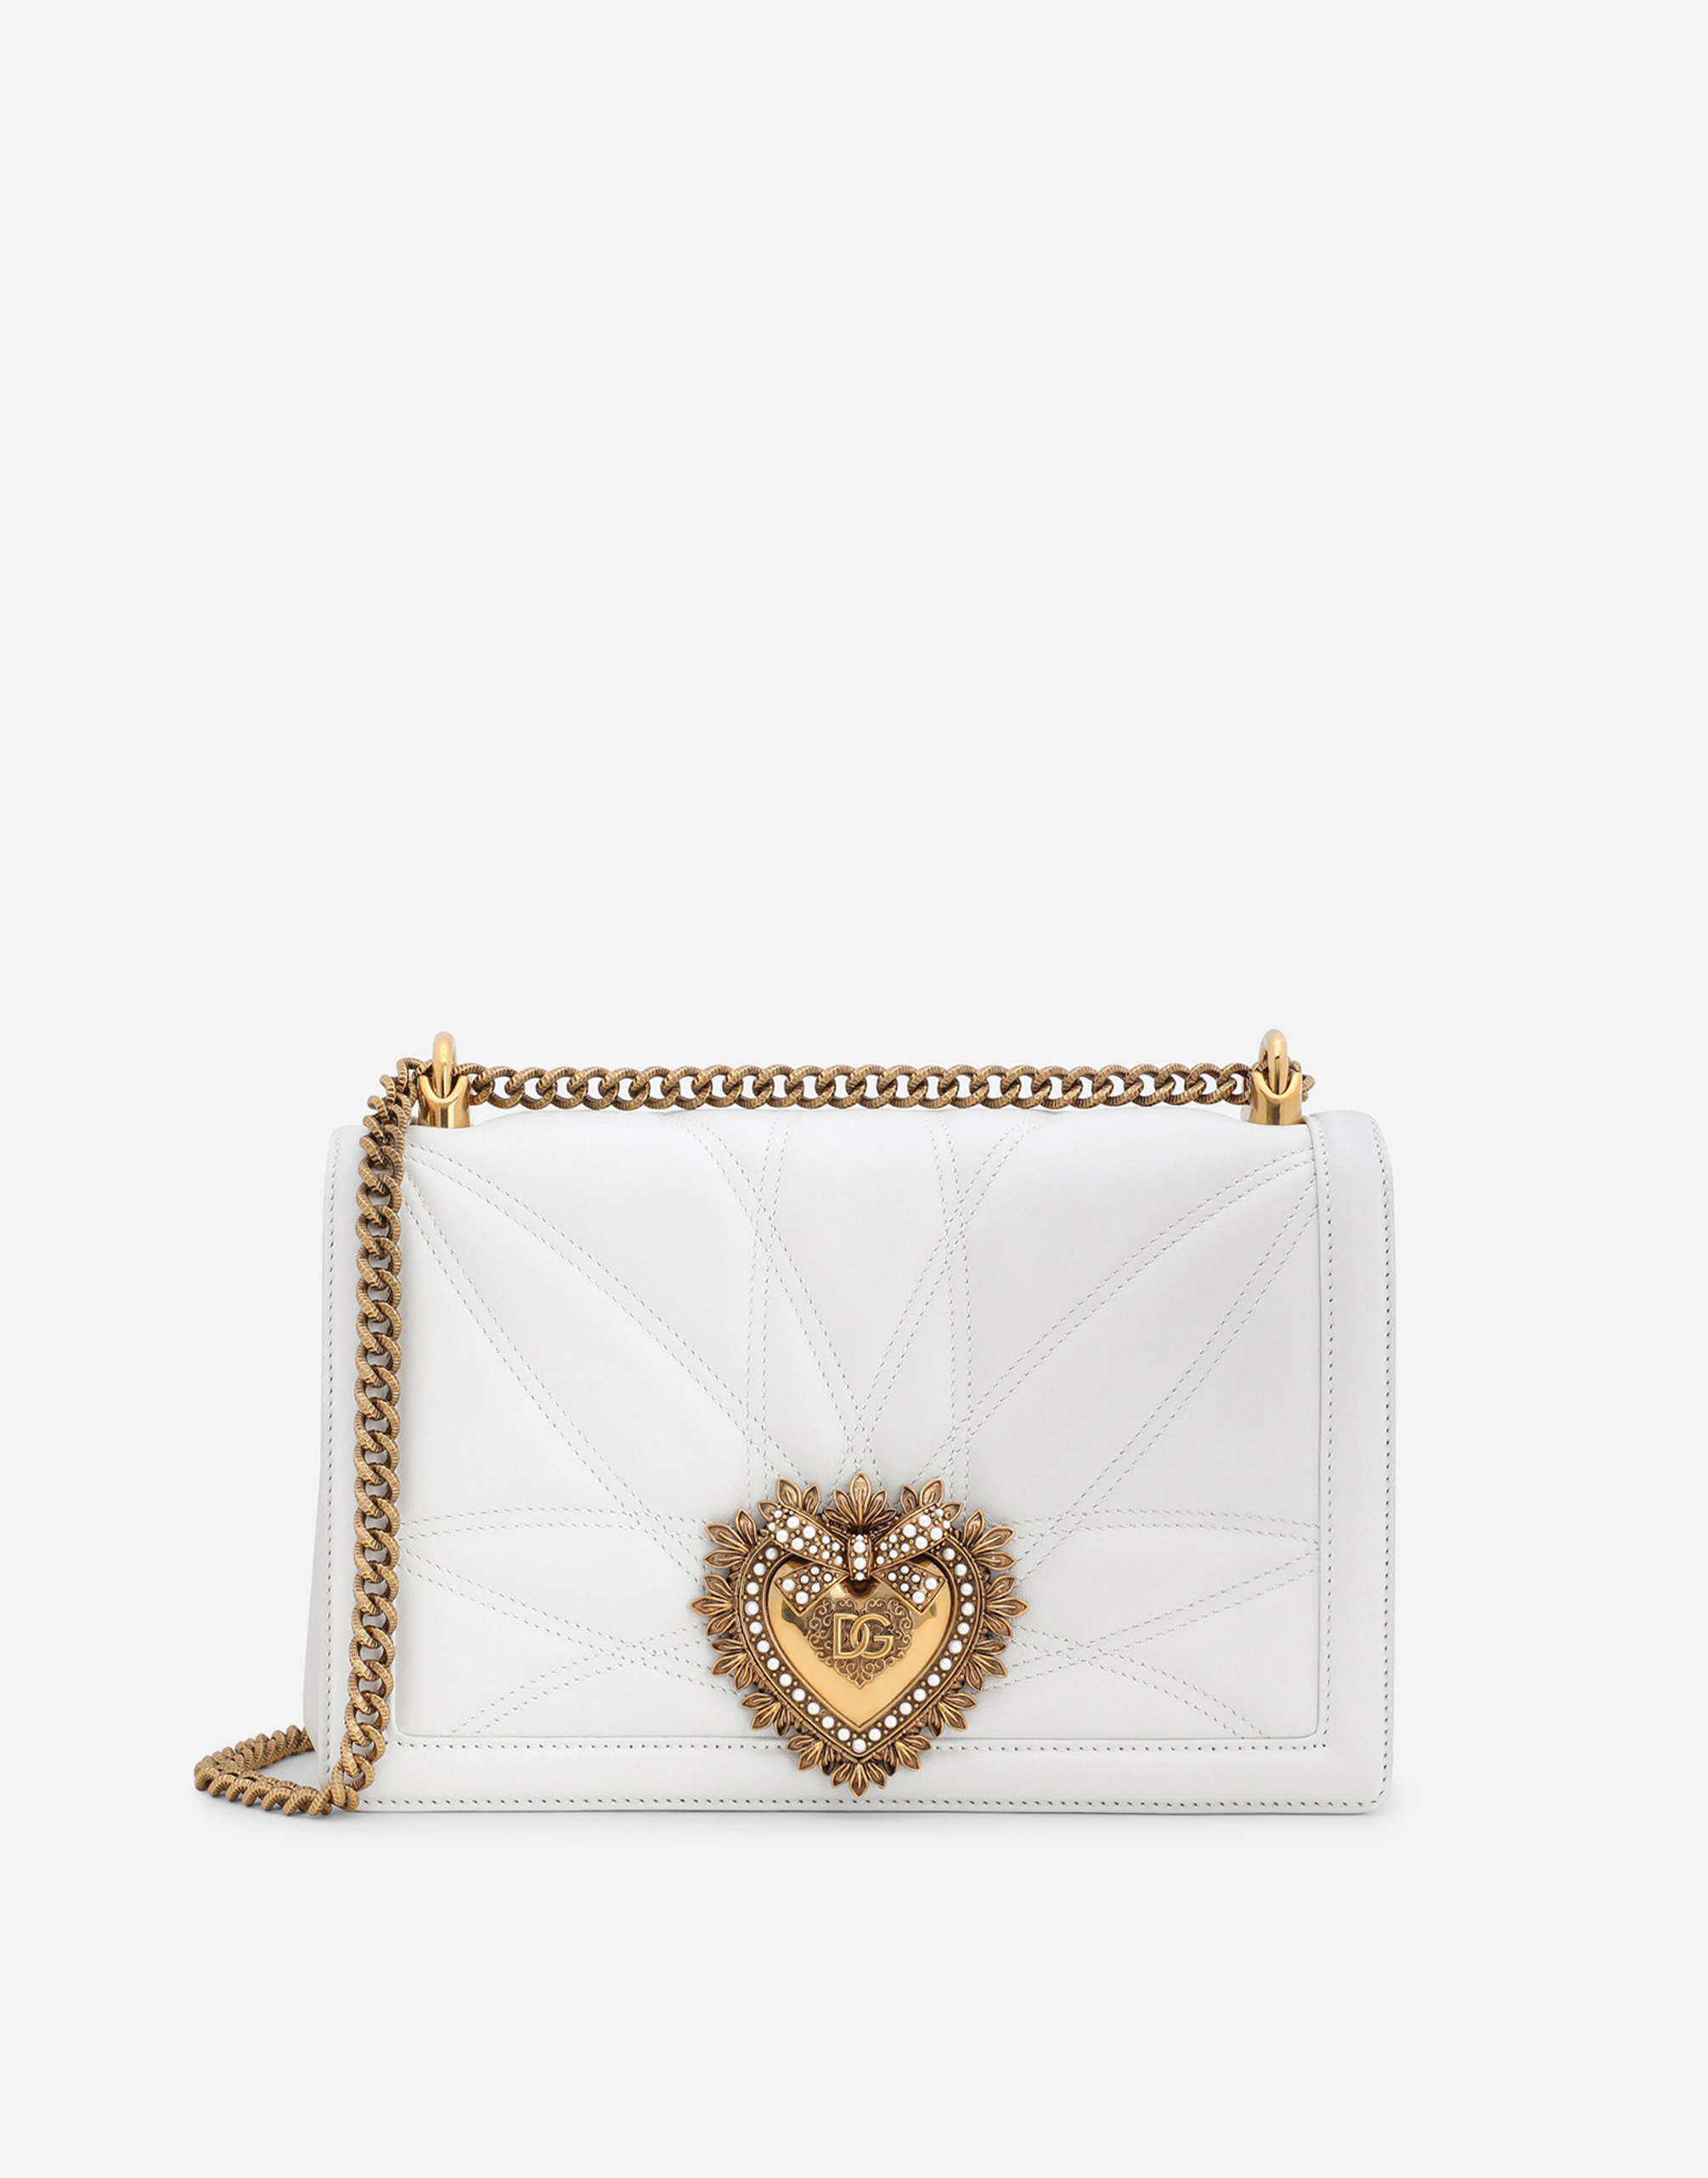 Large Devotion bag in quilted nappa leather in White for Women |  Dolce&Gabbana®